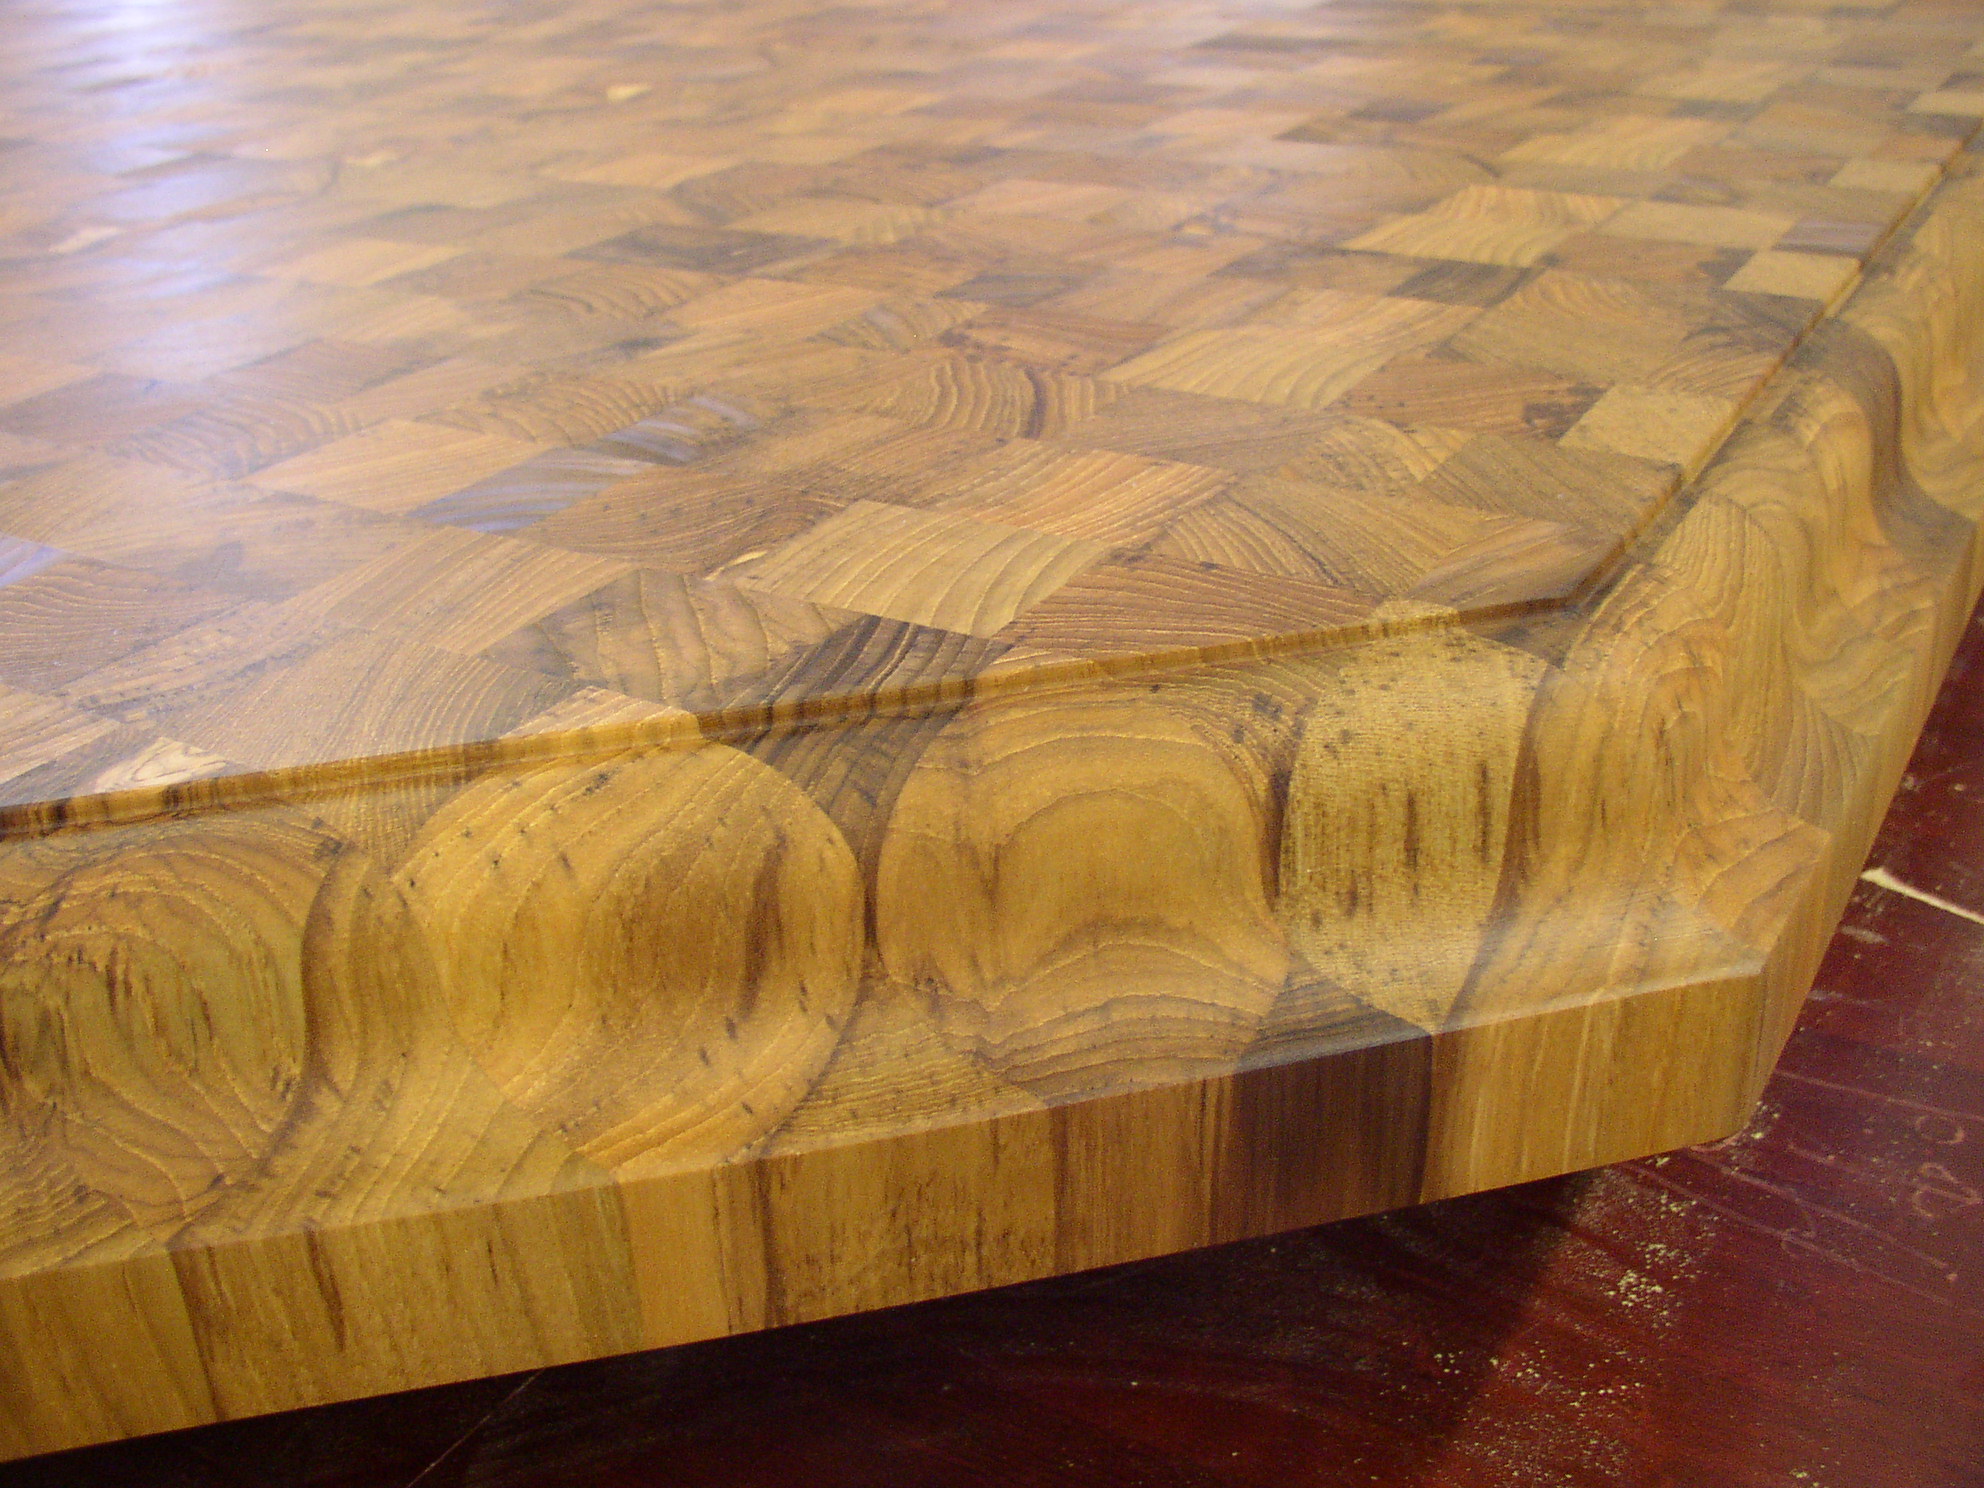 National Butcher Block The Pros And Pros Of An End Grain